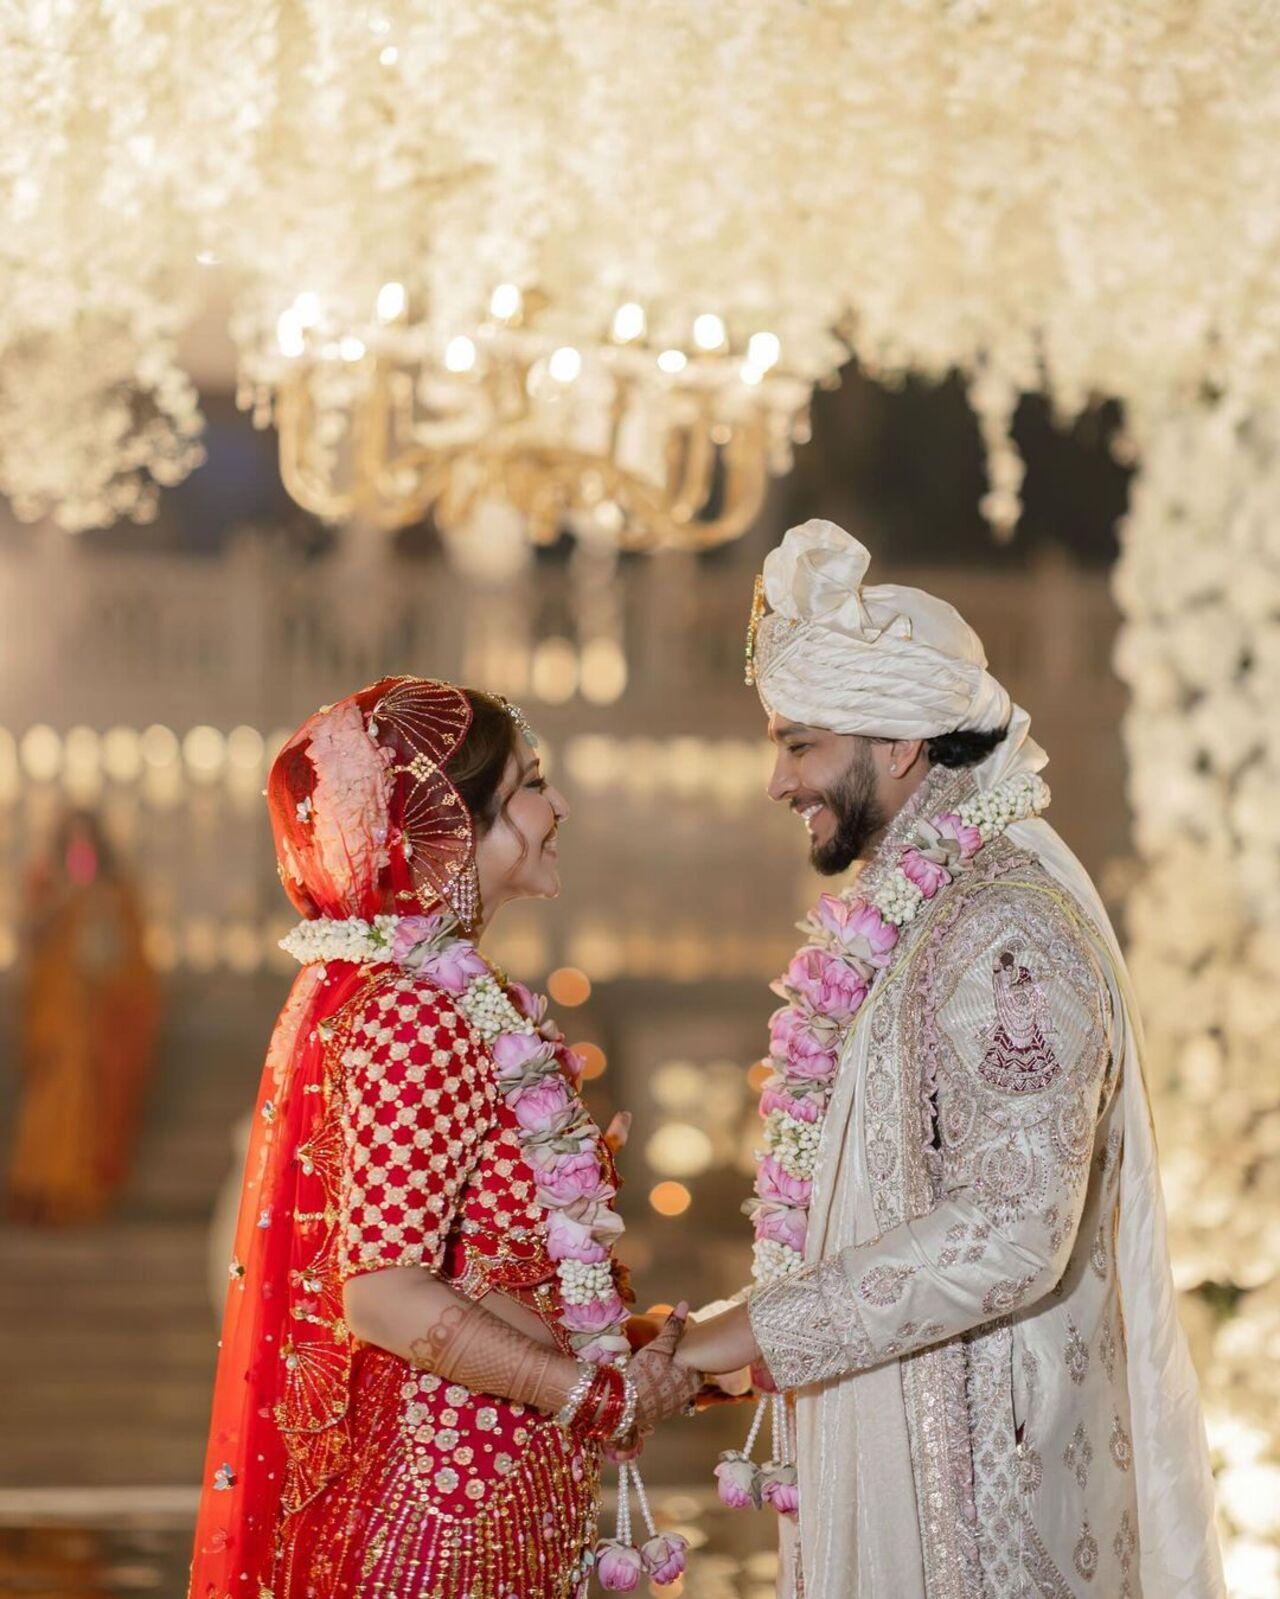 The wedding video which is doing rounds on the internet, features Sonaika and Vikas exchanging vows in a grand royal-themed wedding, marking the beginning of a new chapter in their journey together